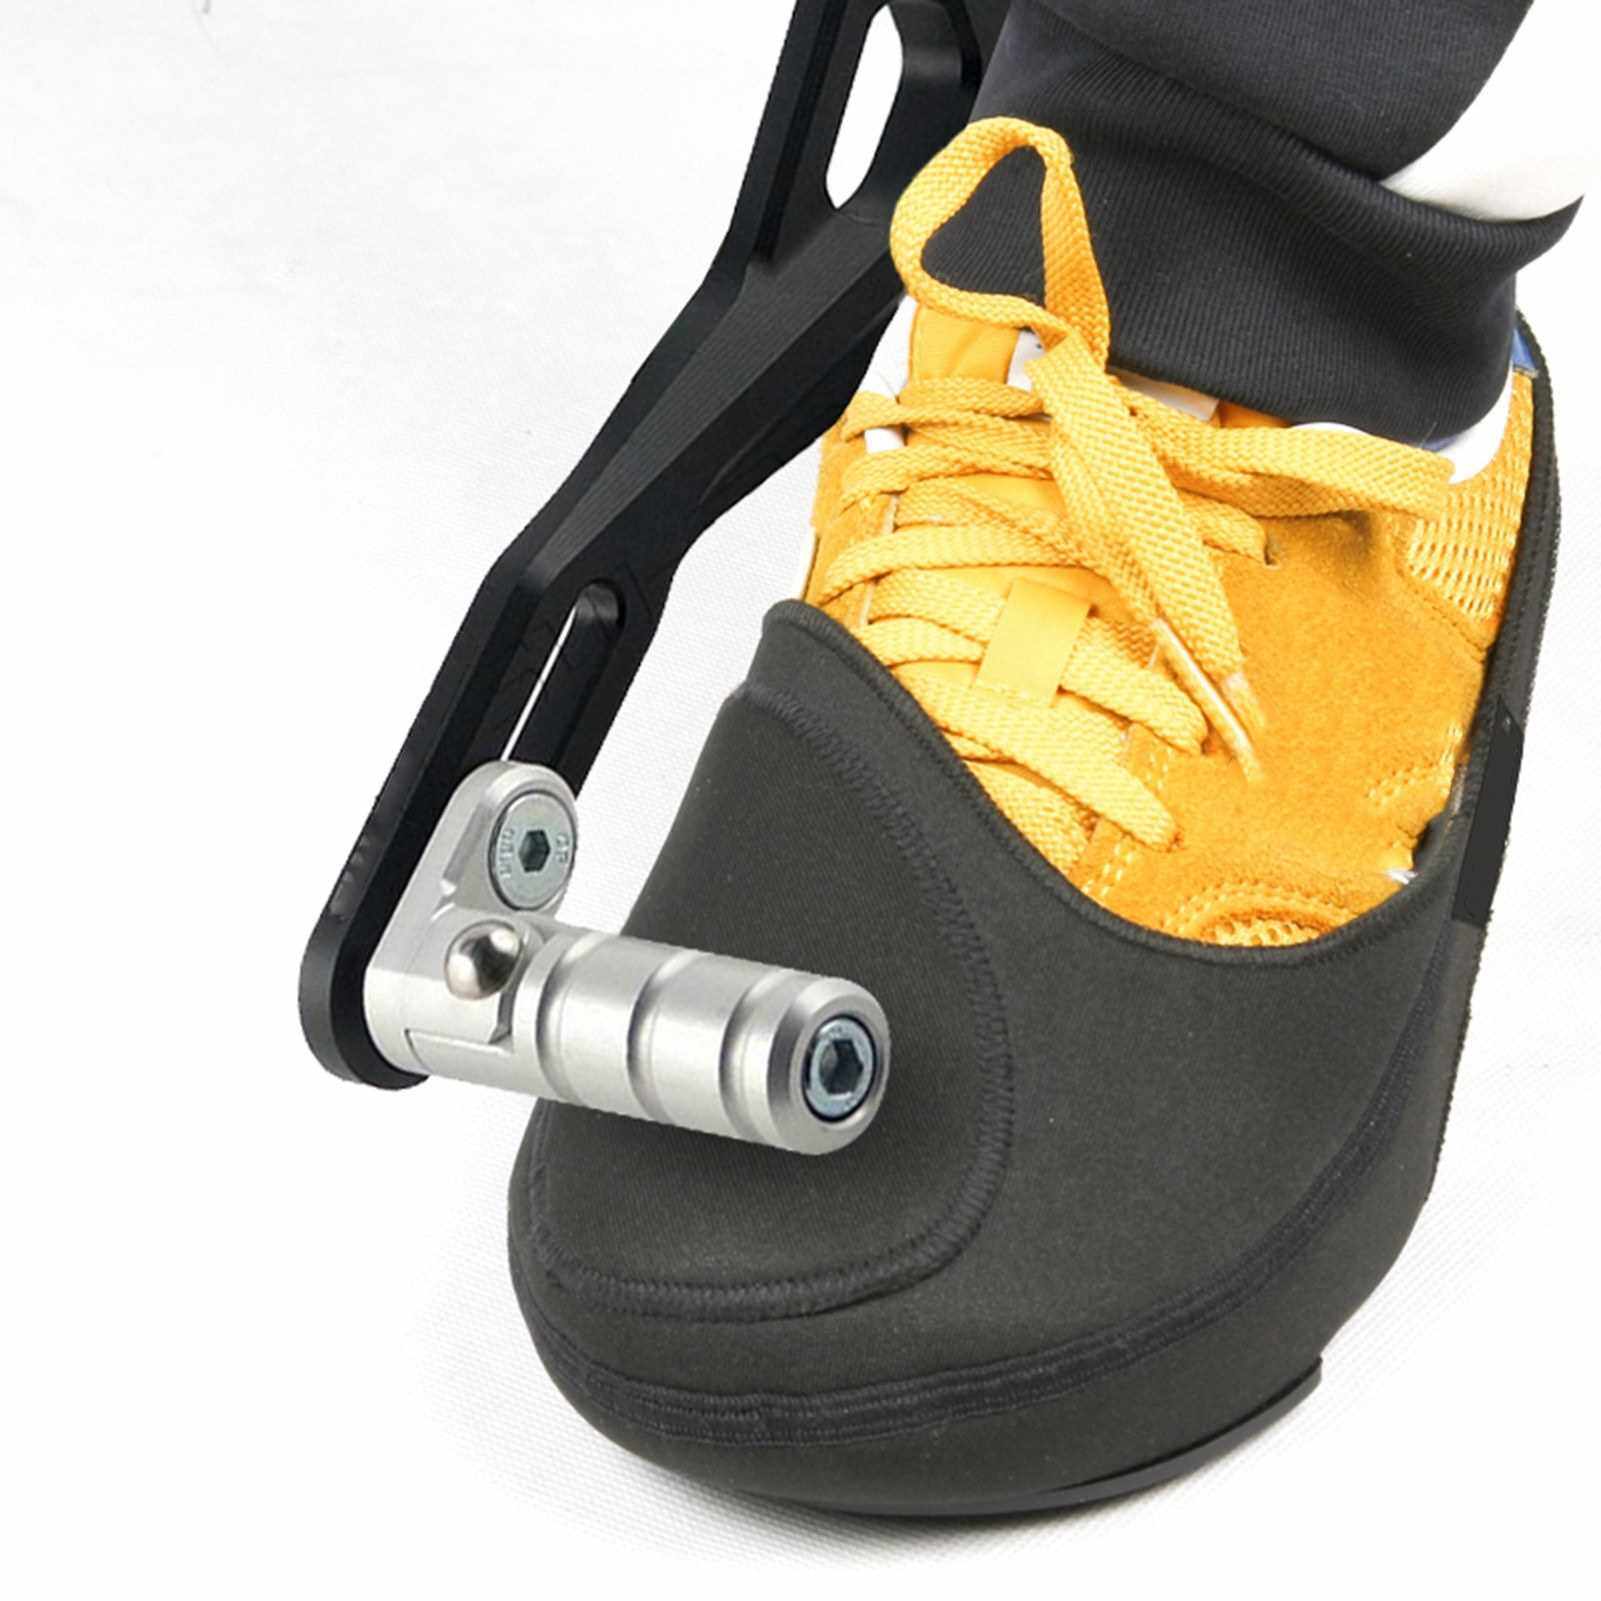 BEST SELLER Motorcycle Shifter Protector Motorbike Gear Boots Shoes Protector (Standard)